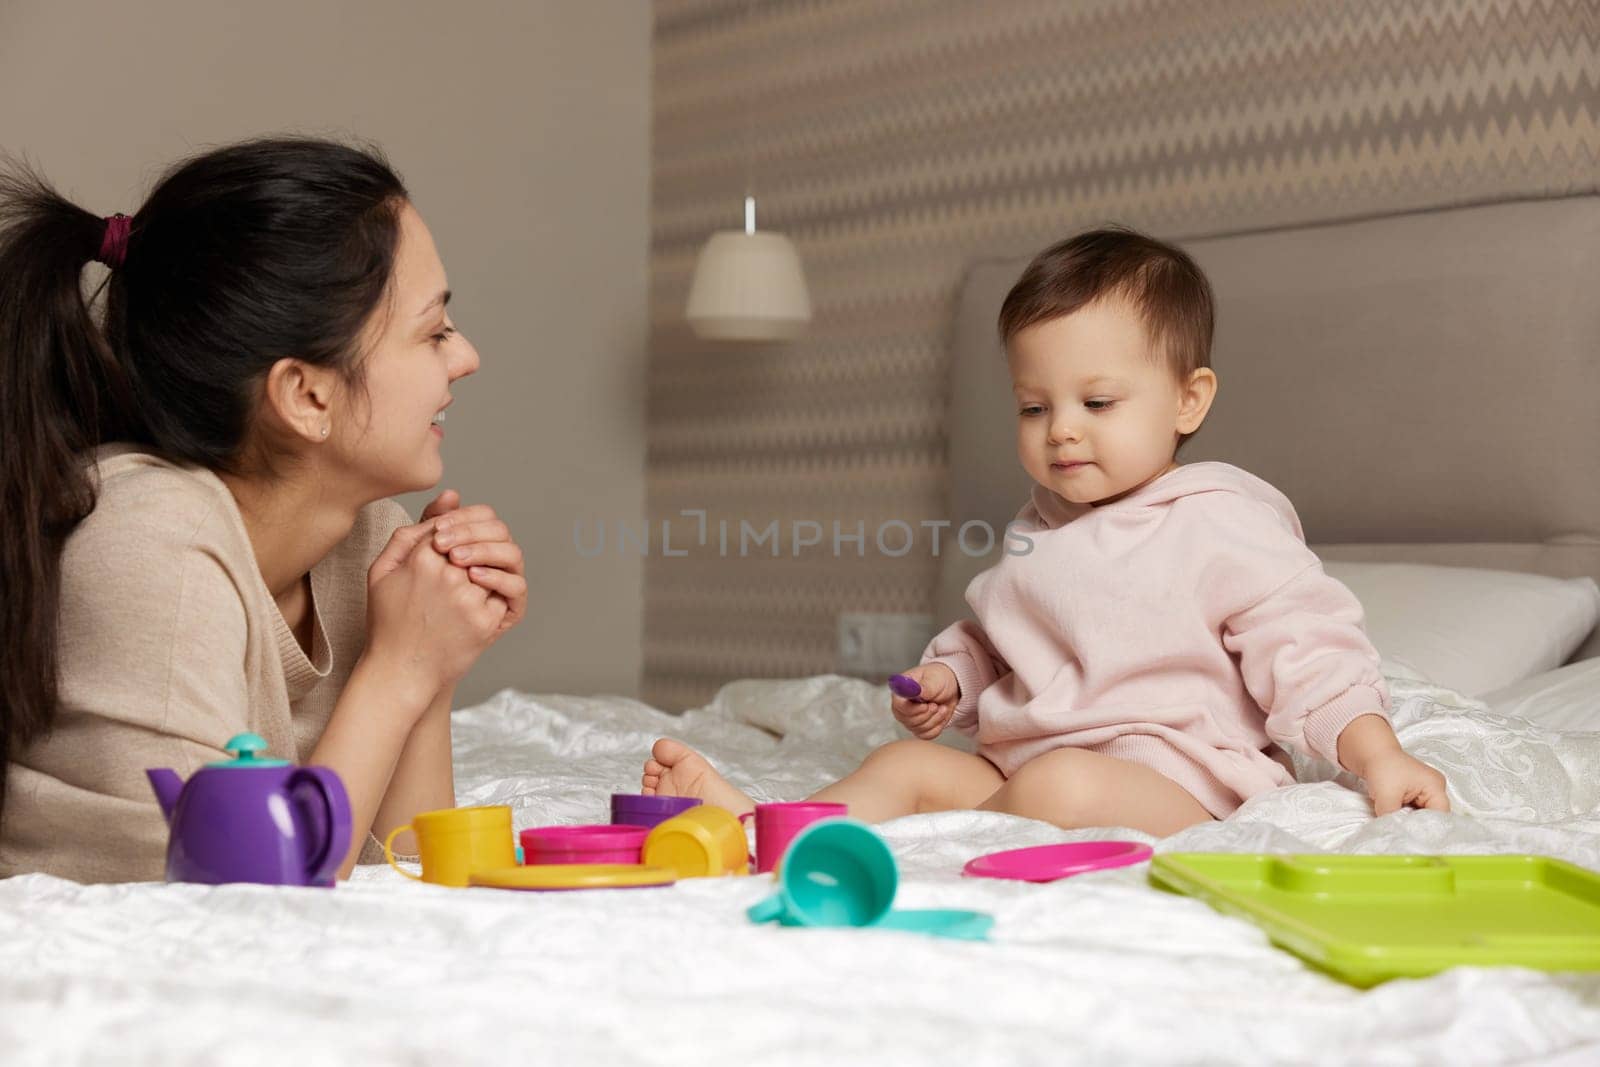 smiling mother and little child daughter playing tea party and spending time together in bedroom, family having fun